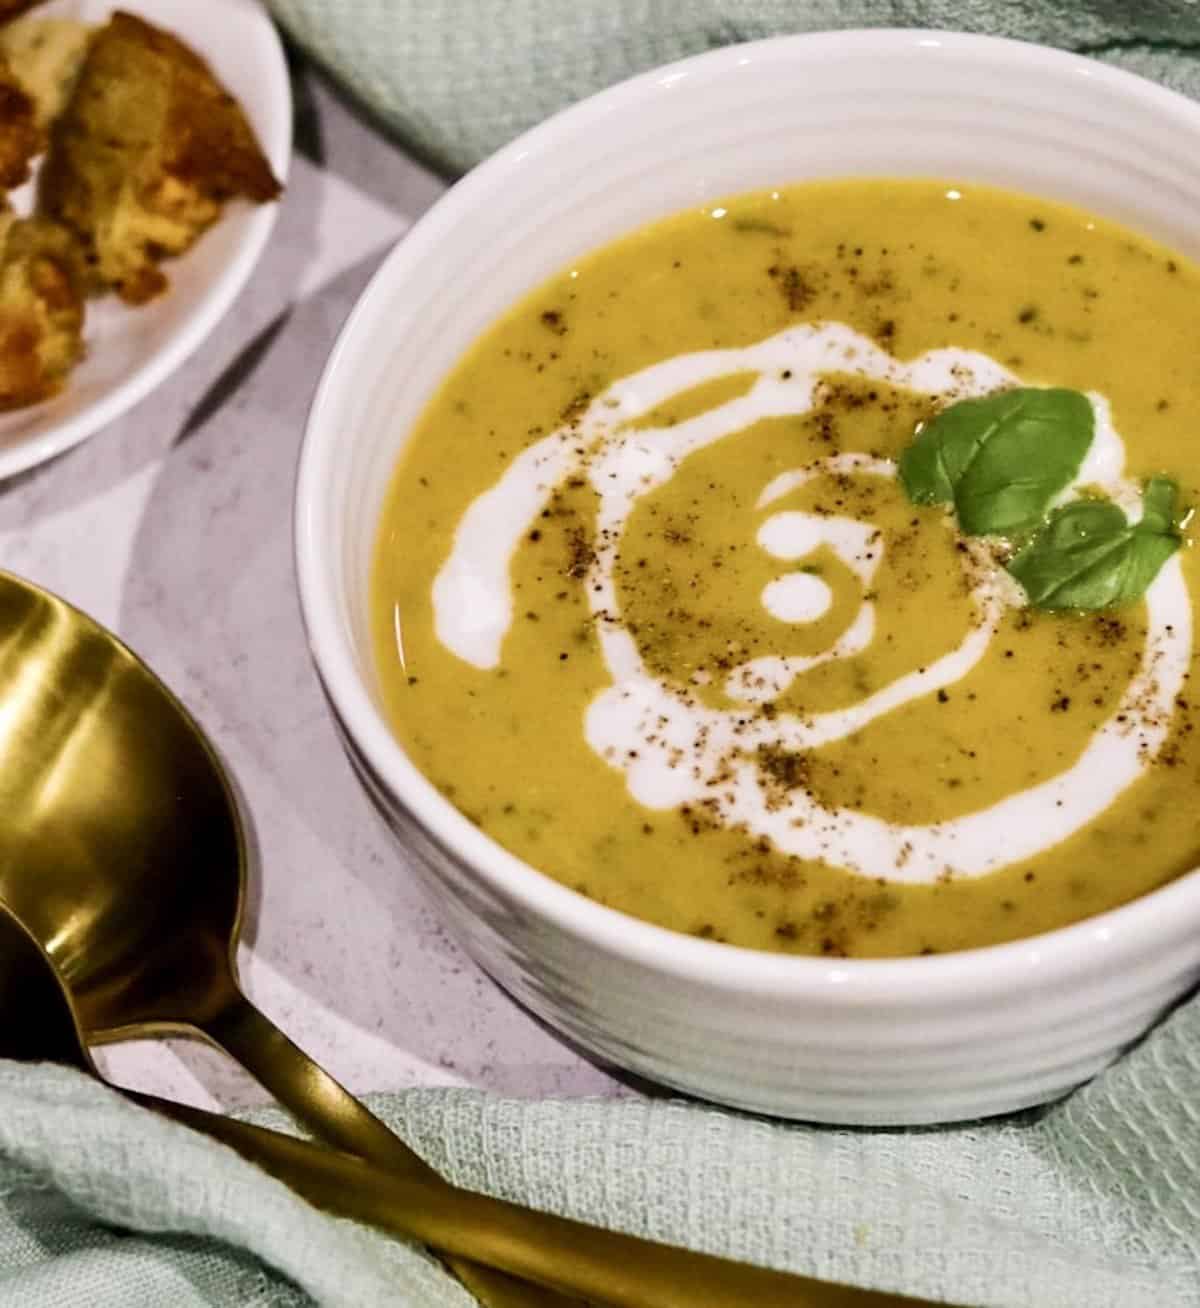 Courgette and carrot soup in a bowl